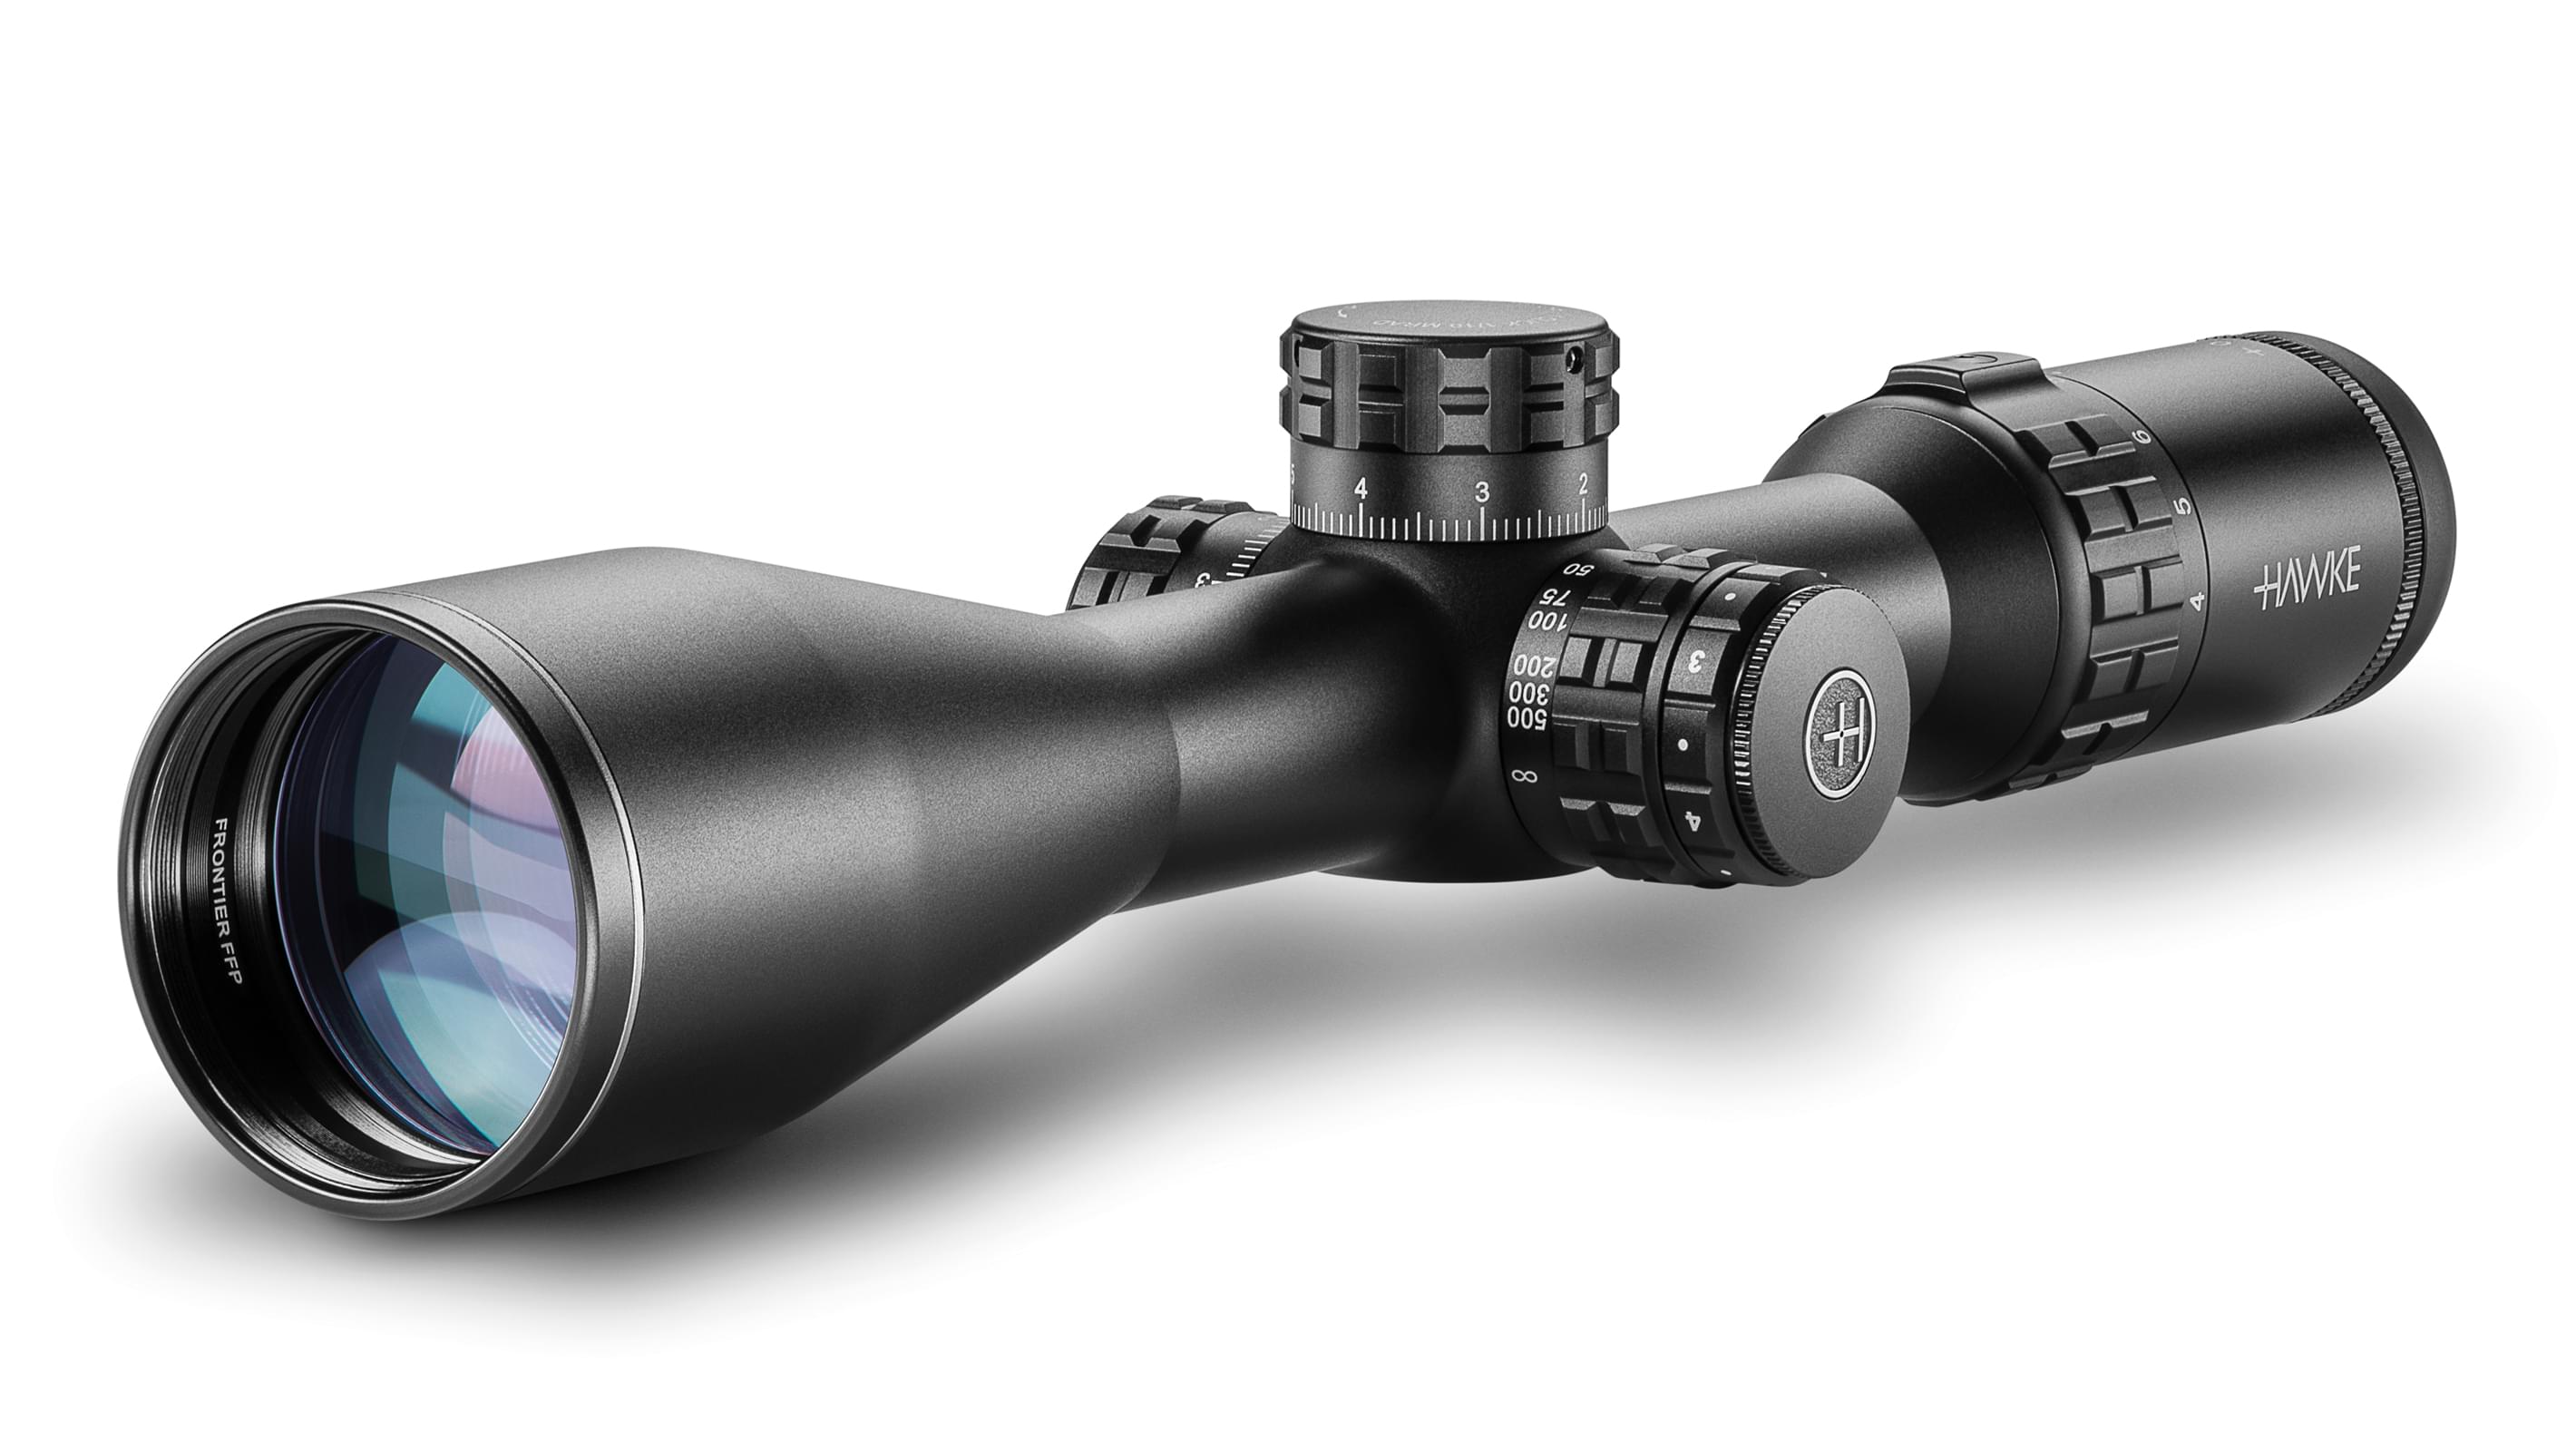 Objective End View Of The Hawke Frontier 30 FFP 4-20x50 Mil Pro Rifle Scope